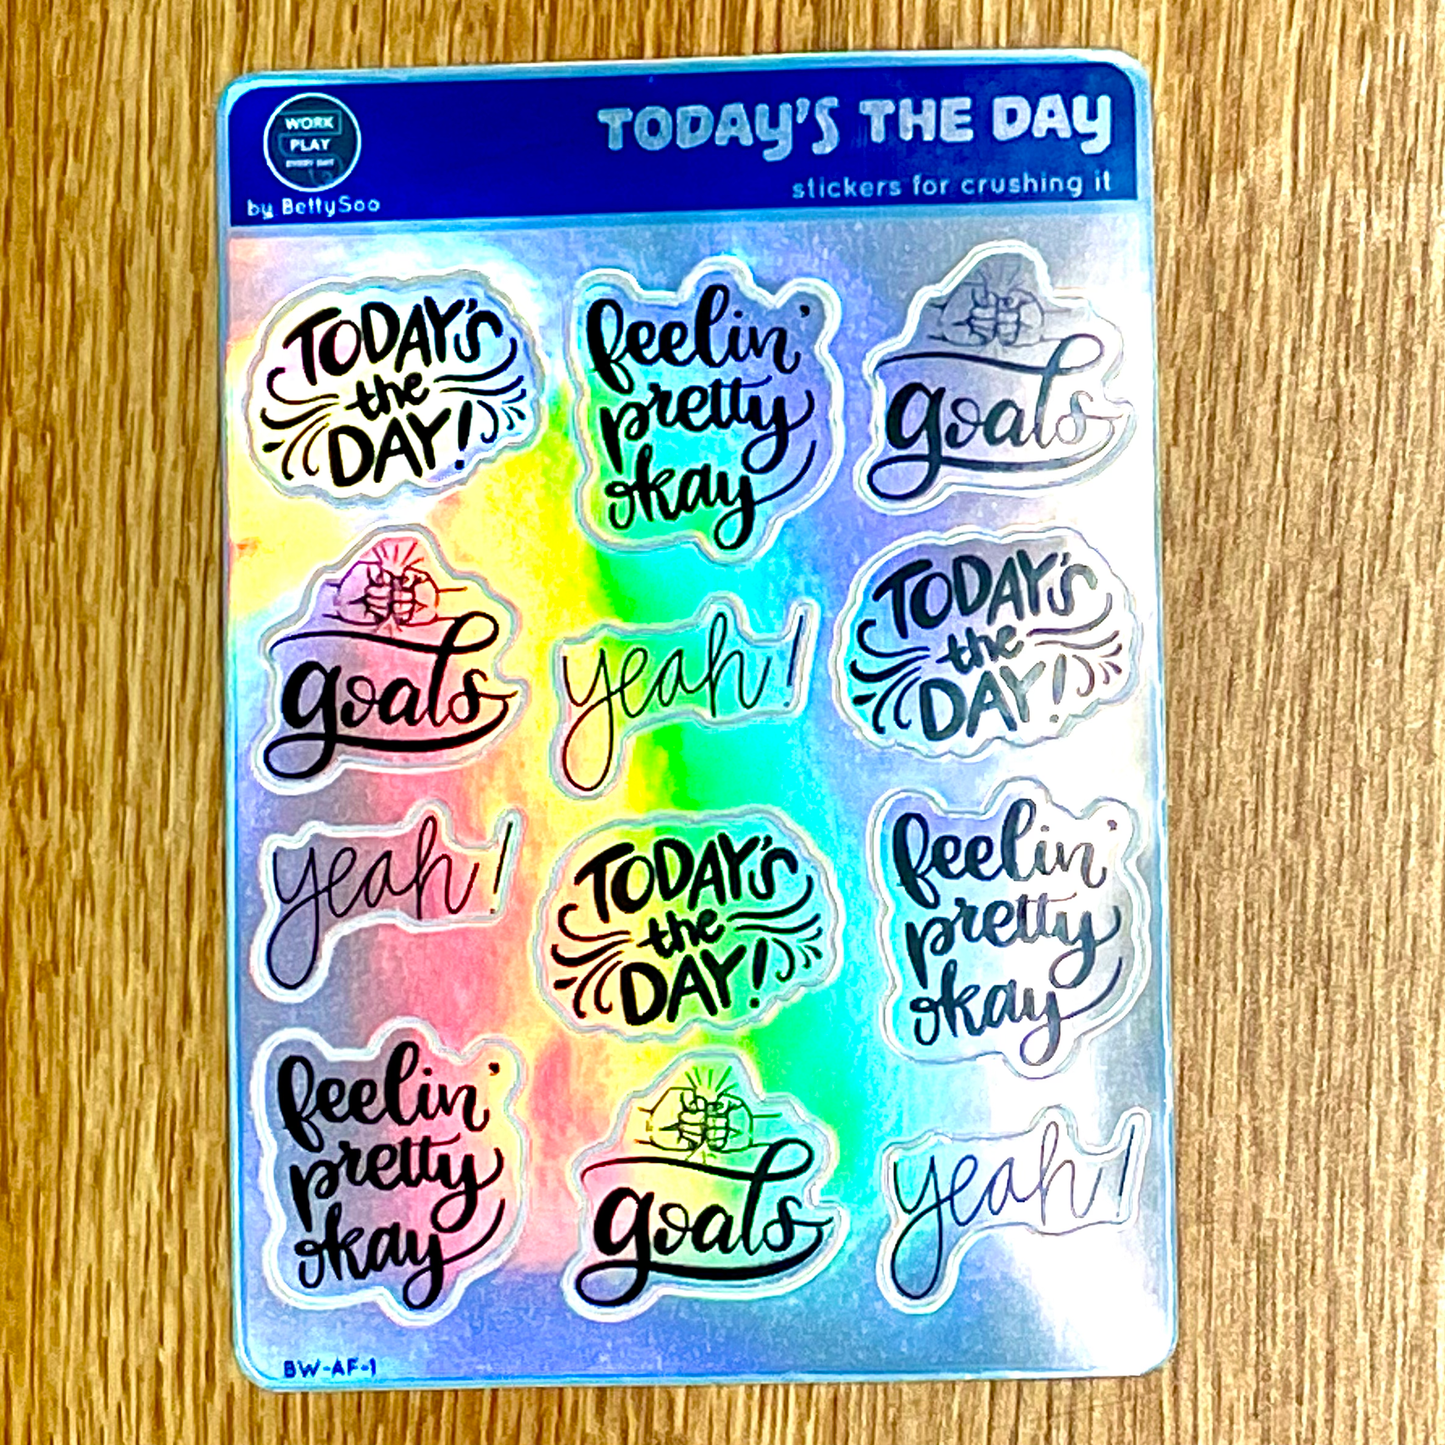 Affirmation Sticker Combo 2 (Translucent, Clear Gloss, or Holographic)